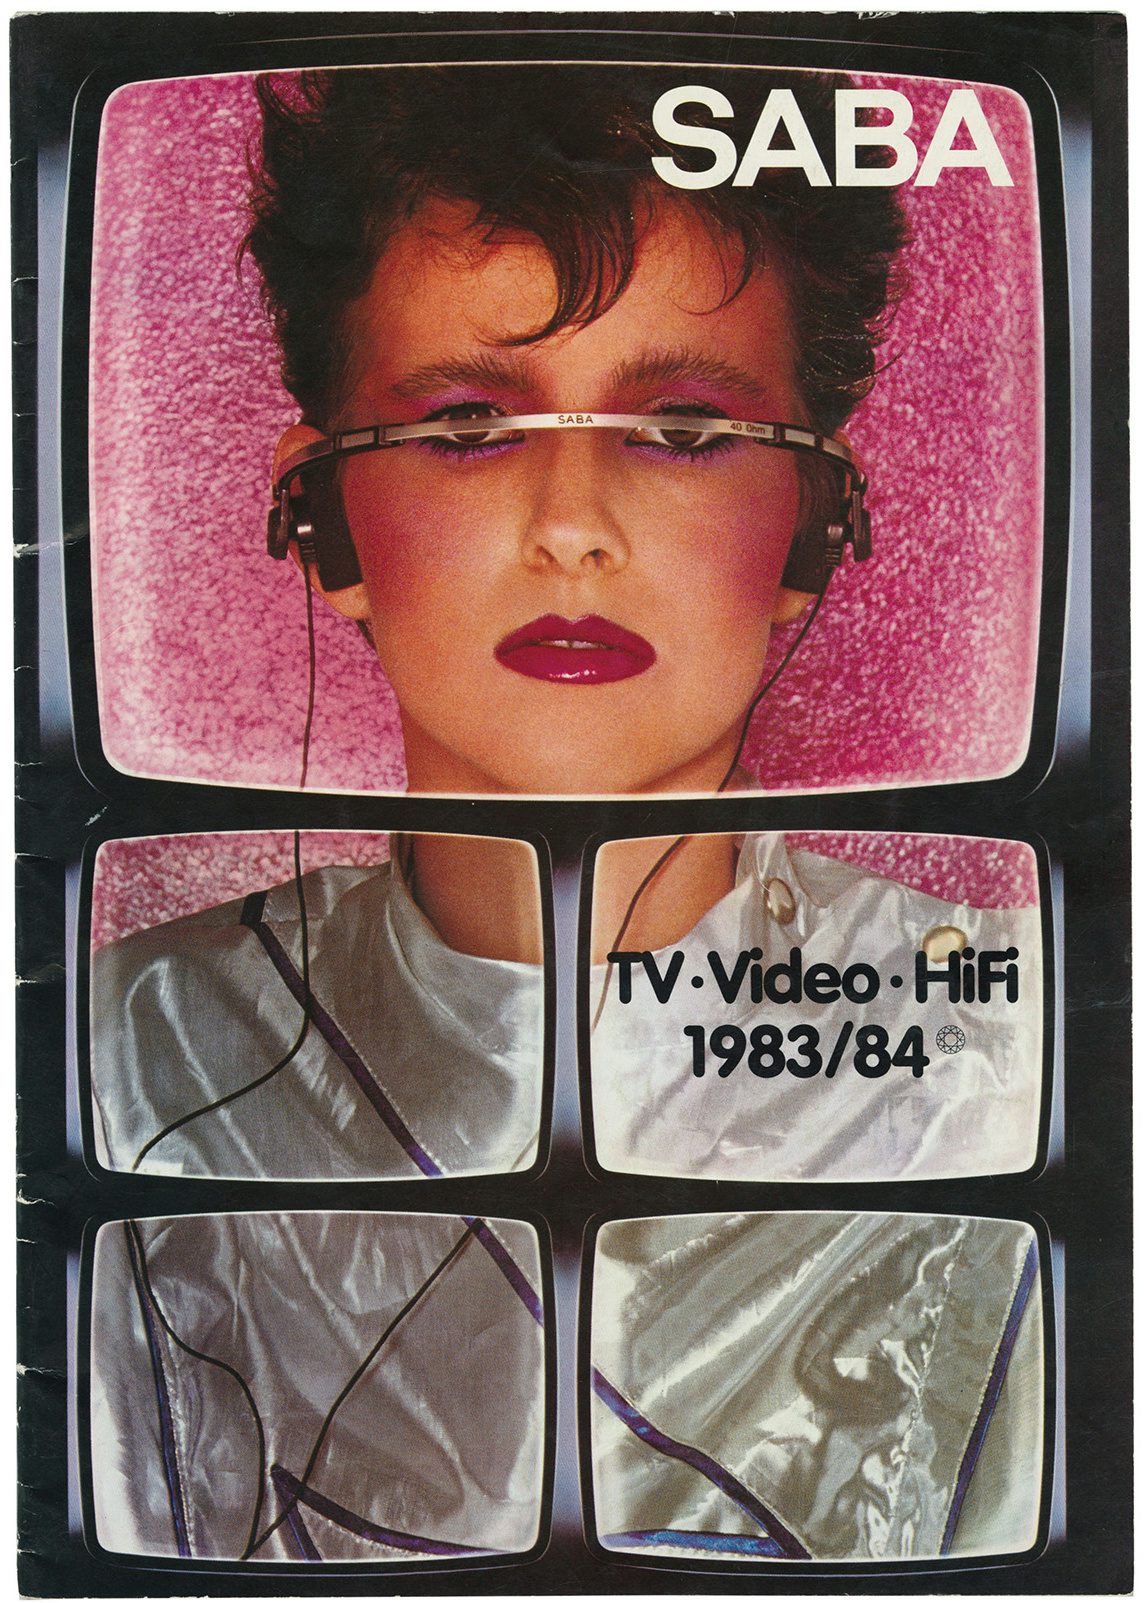 Poster showing a person wearing silver clothing and headphones partially covering their face. The photograph is divided into five boxes in the style of TV screens